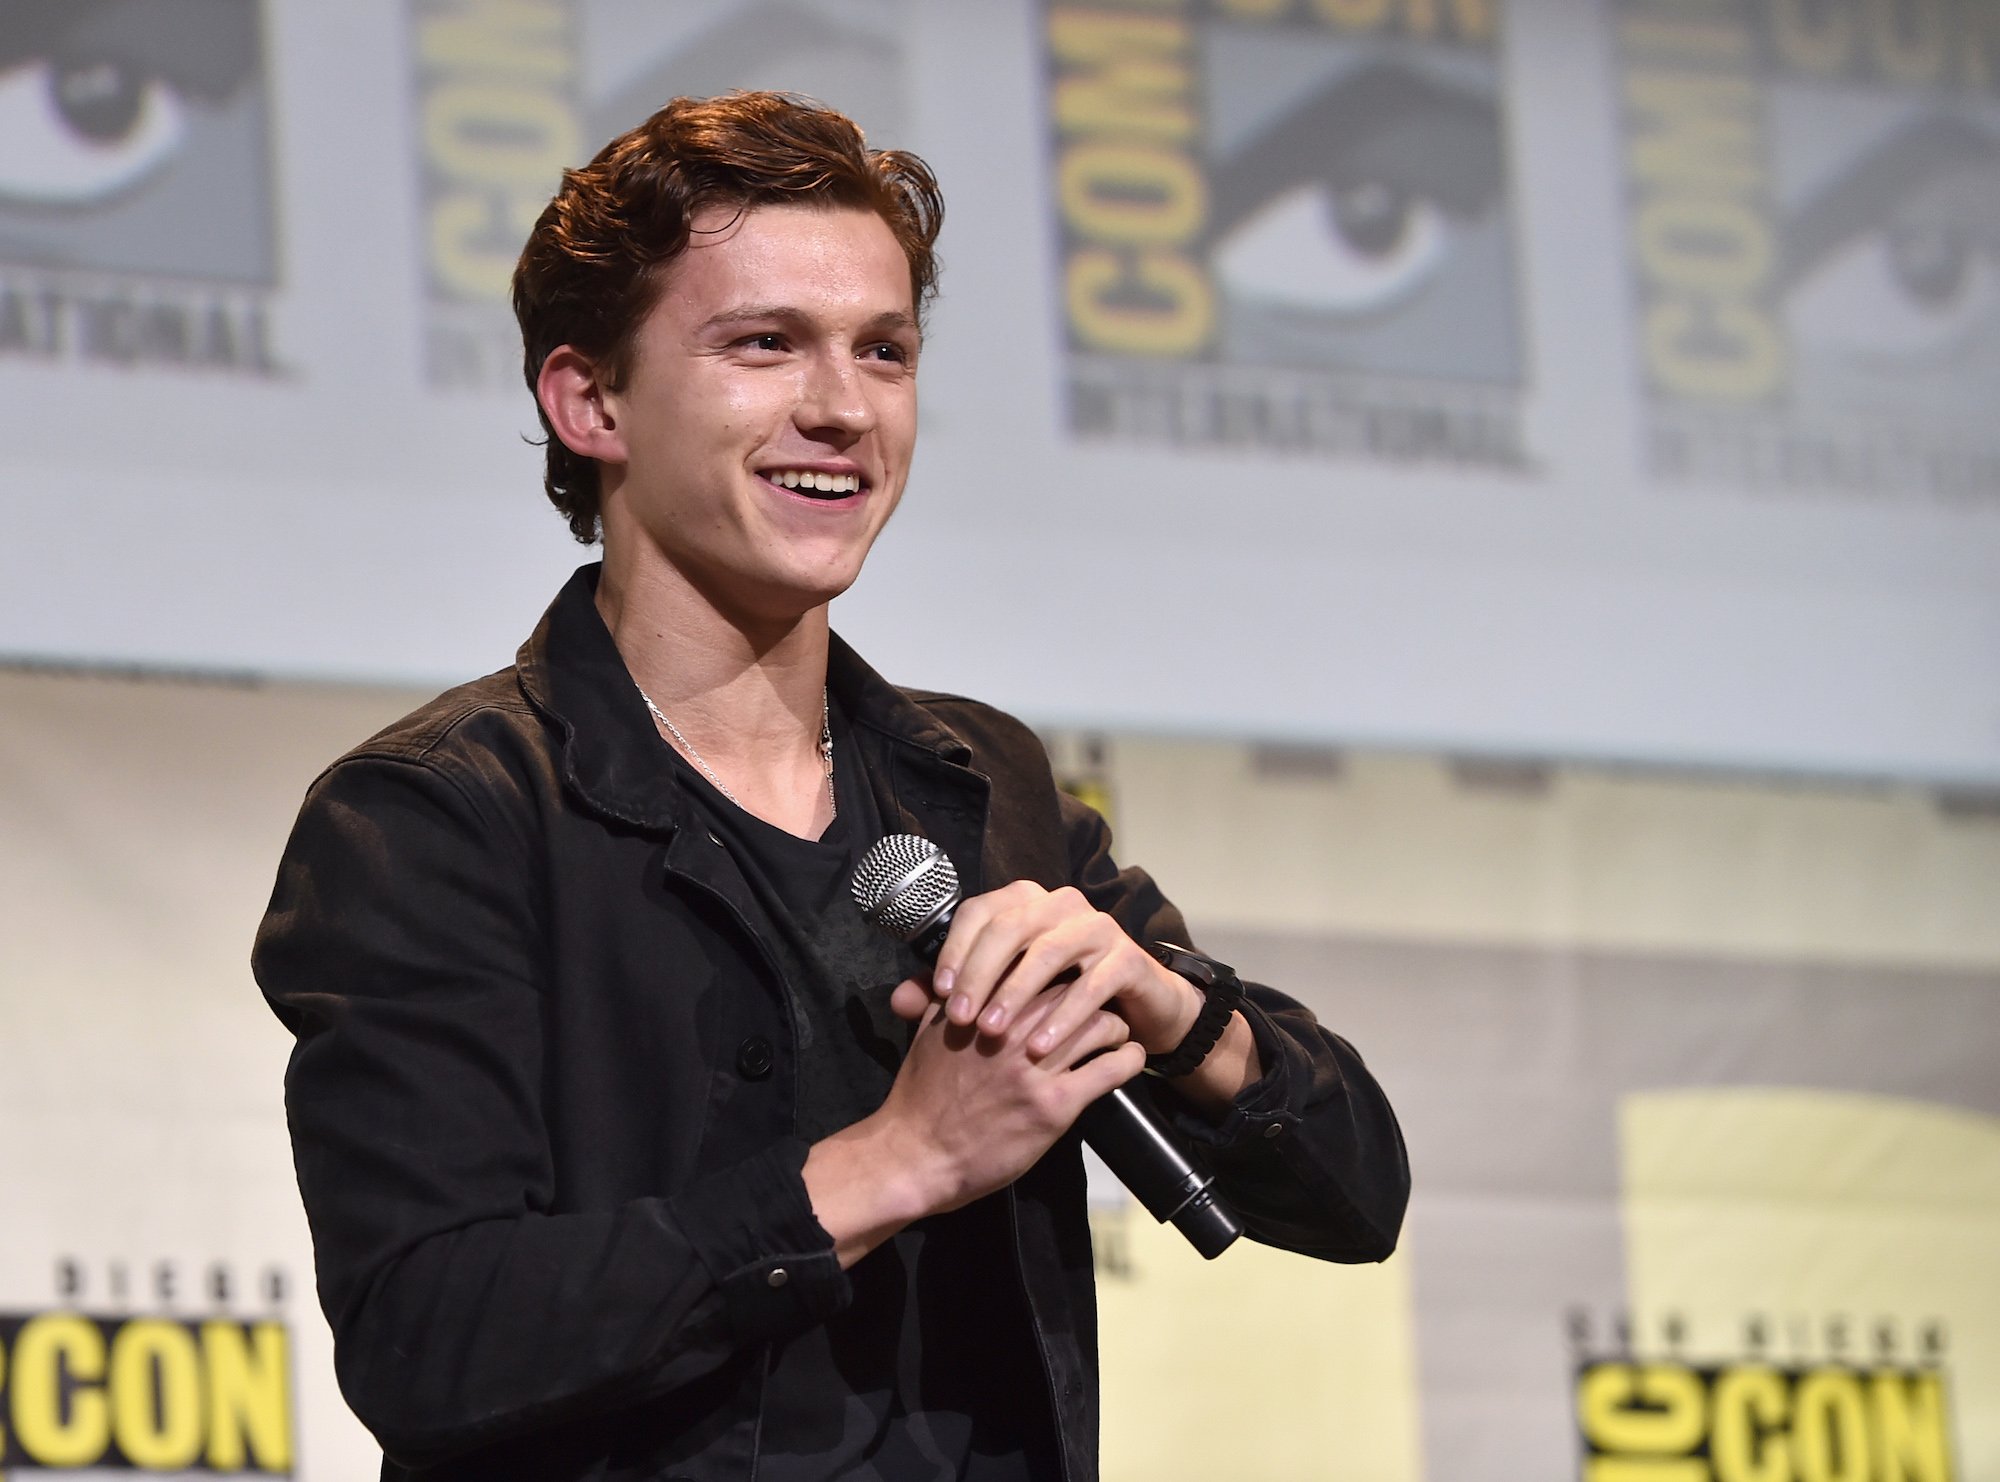 Tom Holland at the San Diego Comic-Con International 2016 on July 23, 2016